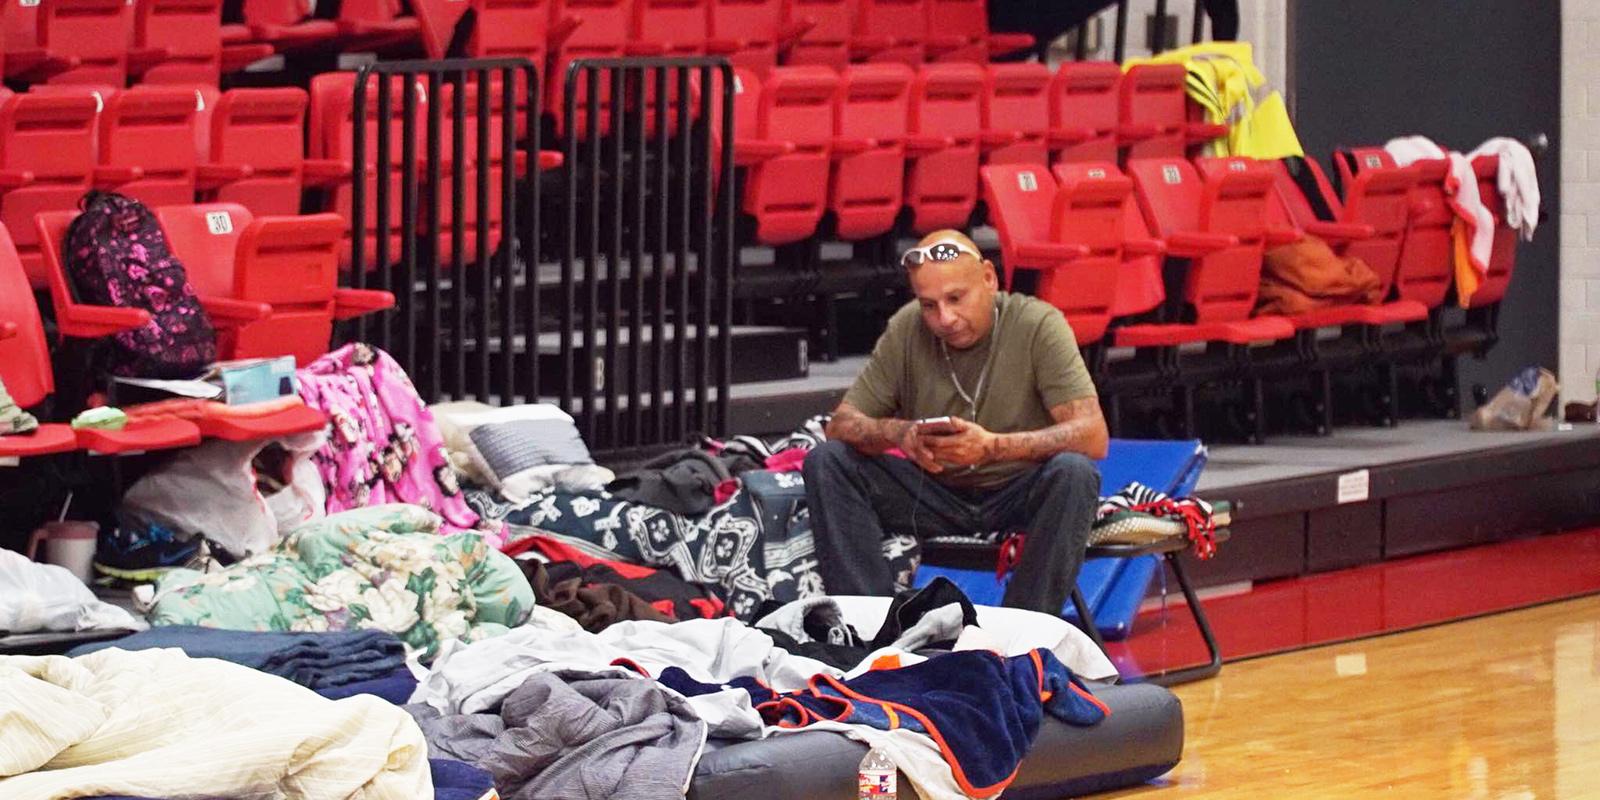 A man in Lee College's shelter somberly checks his cell phone.